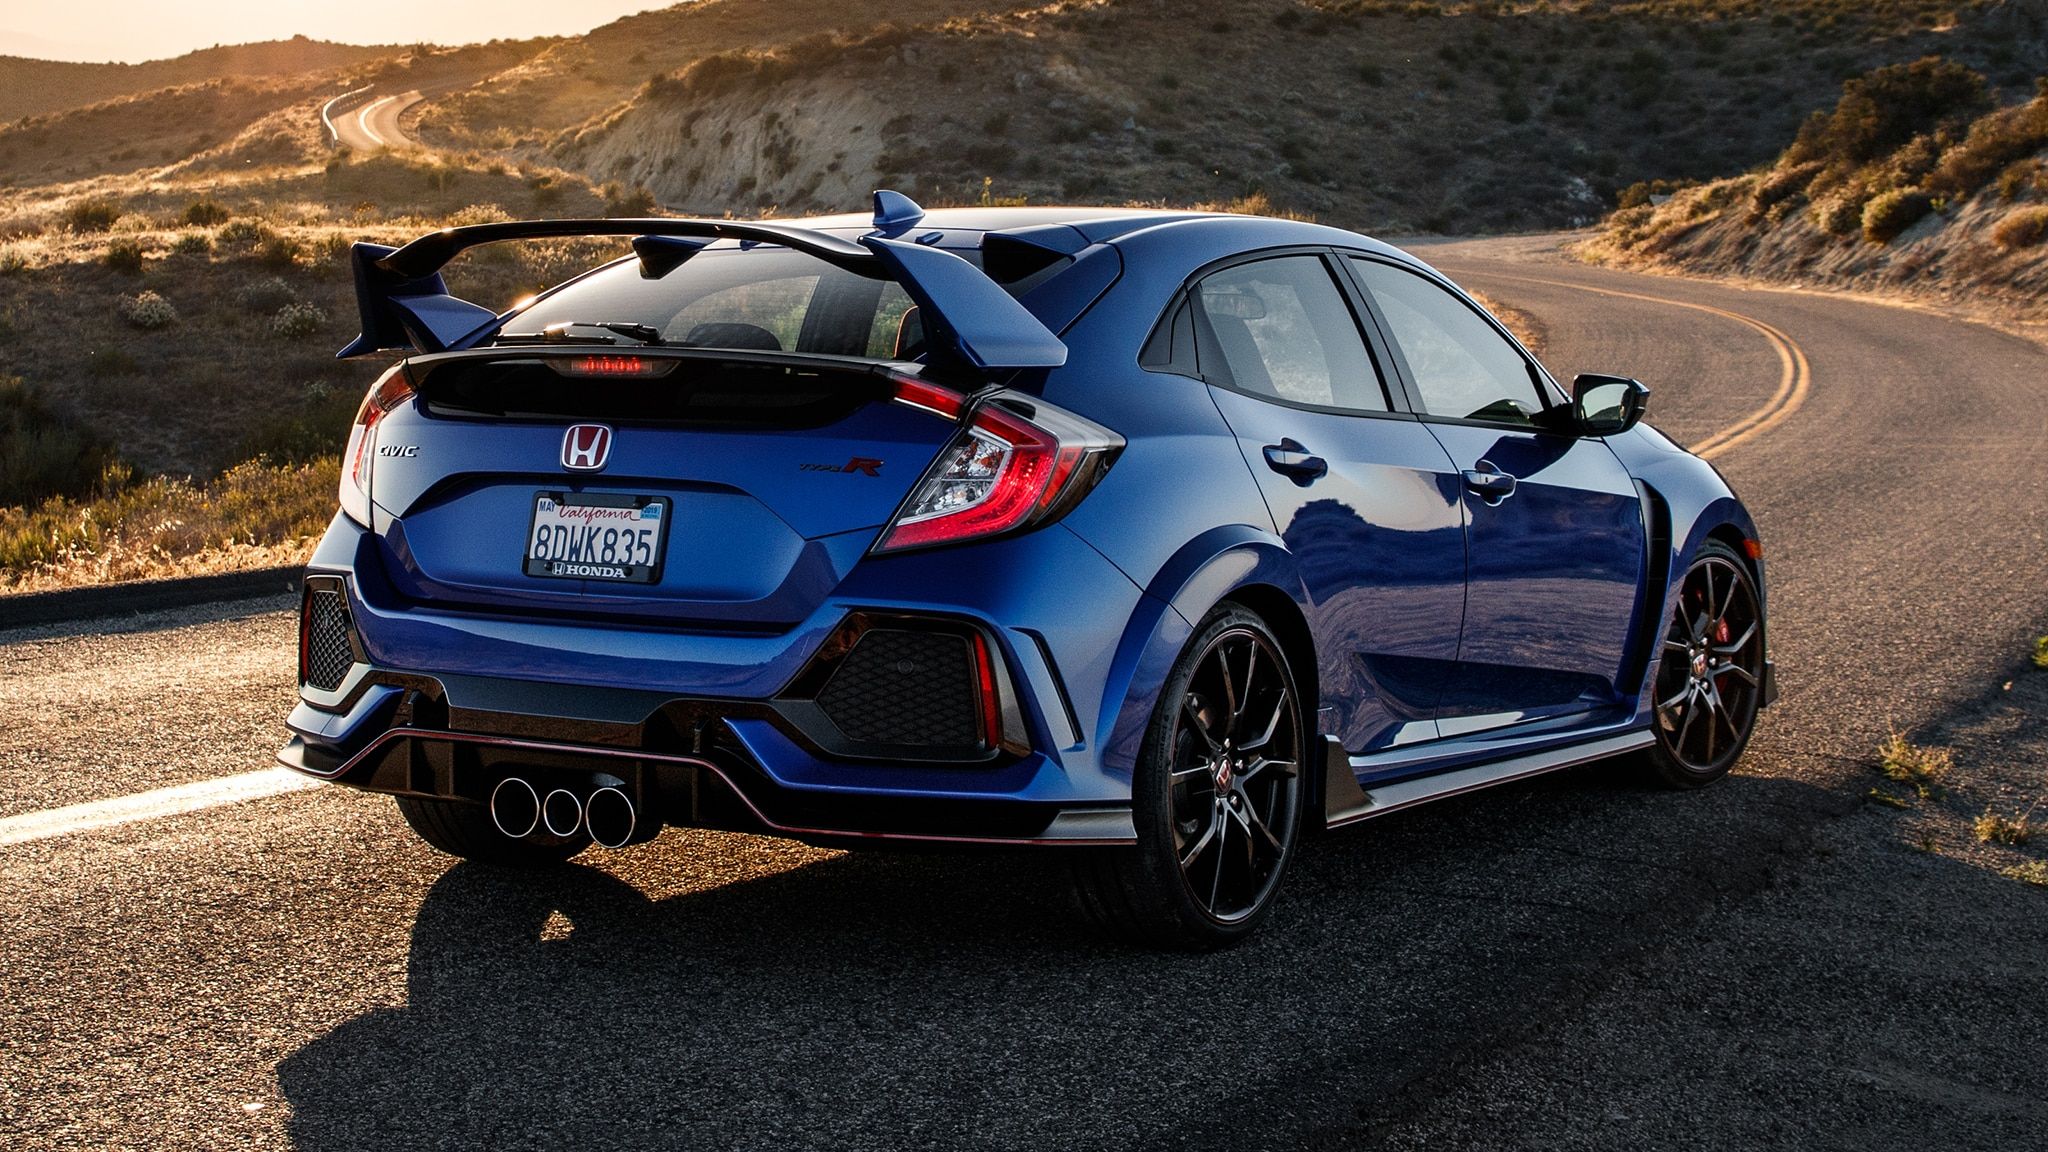 Ways the 2018 Honda Civic Type R is a FWD Performance Star